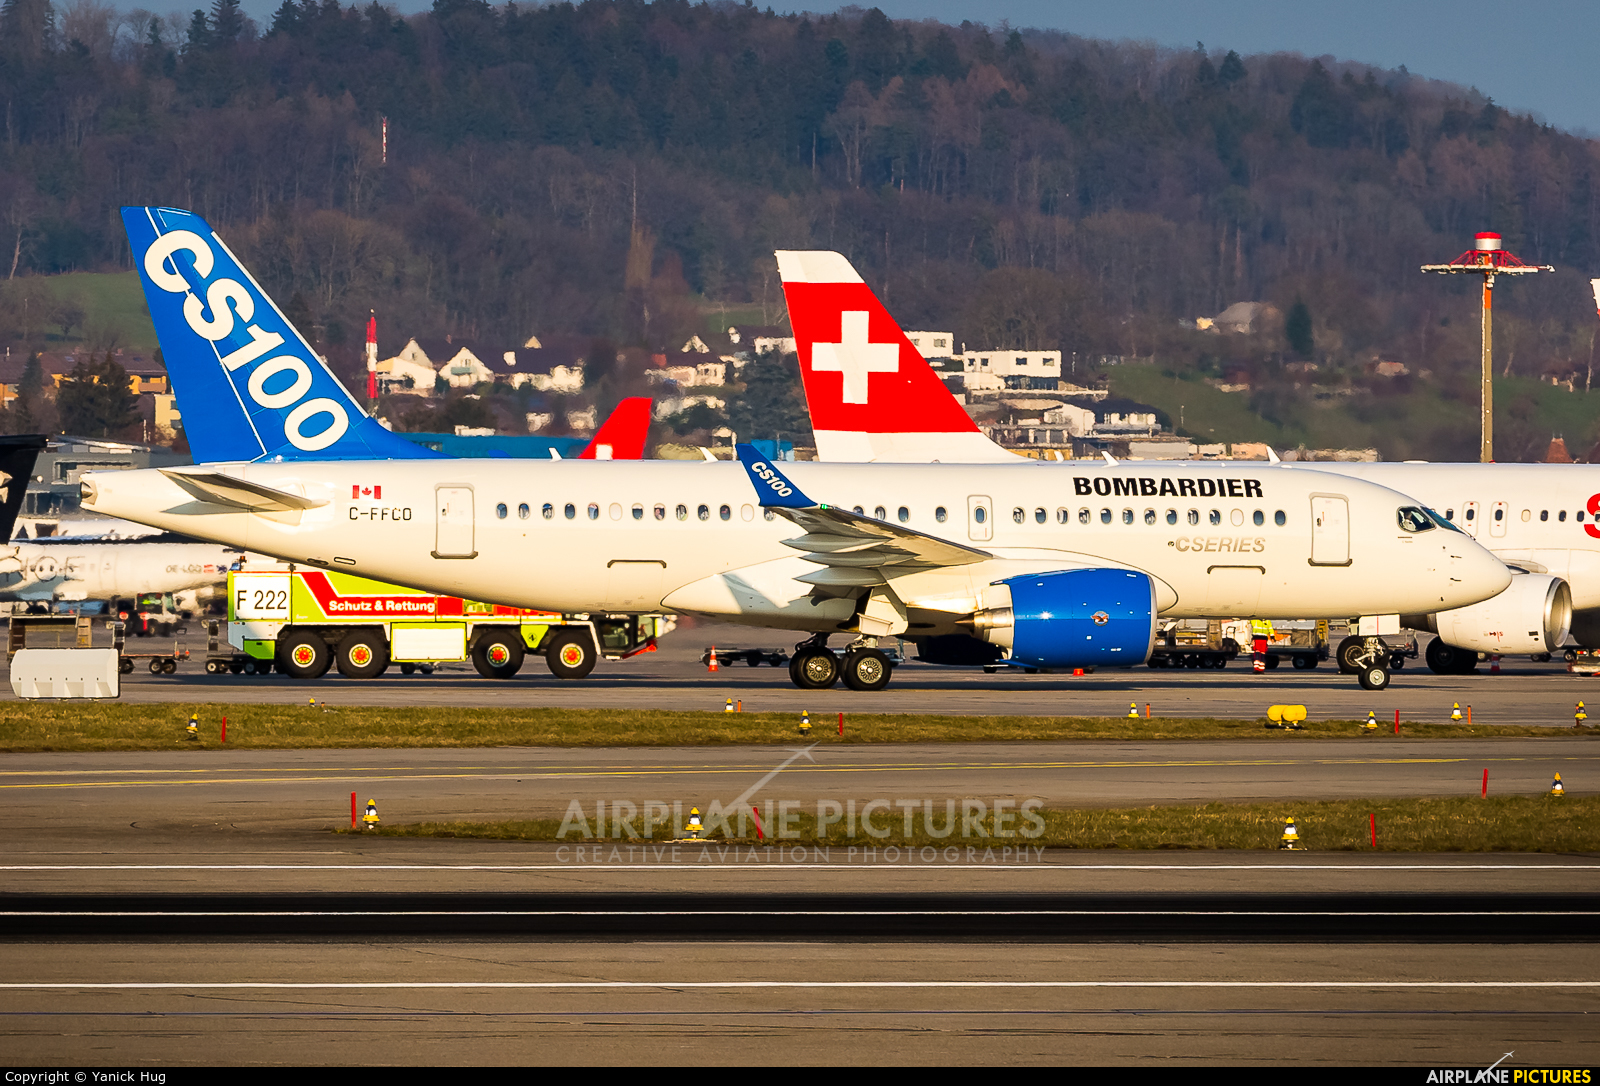 Bombardier C-FFCO aircraft at Zurich